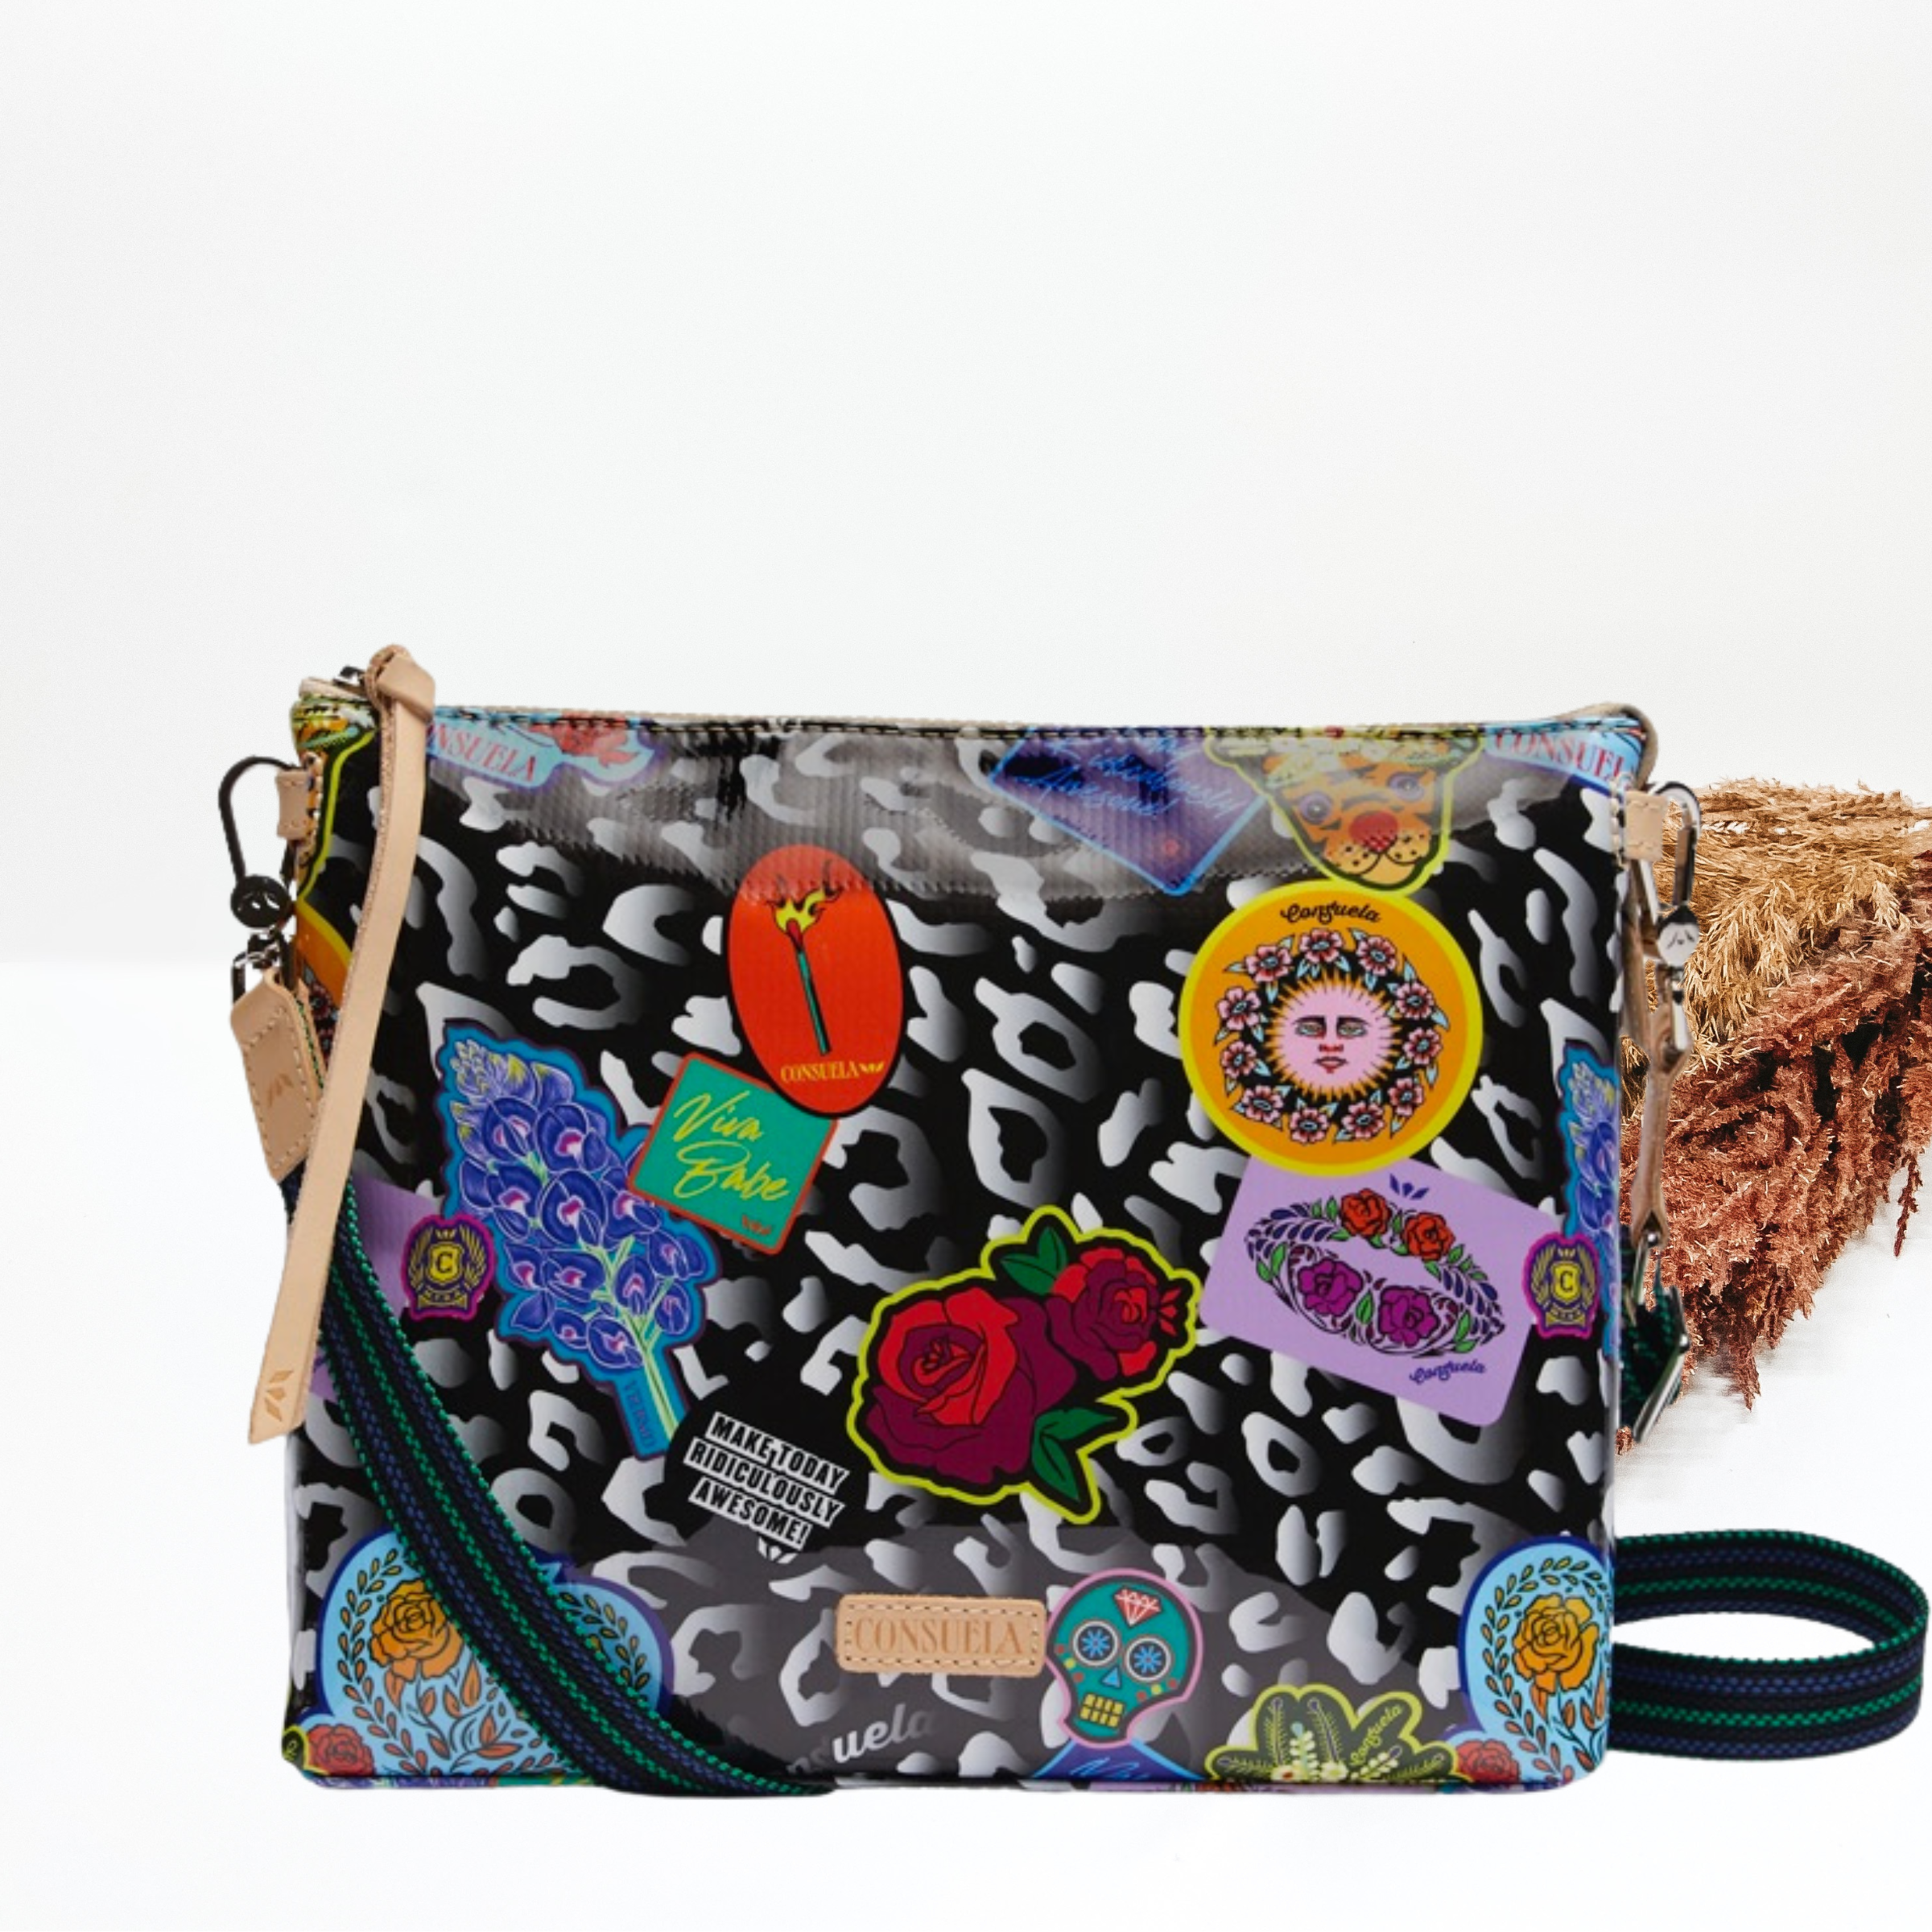 Pictured is a crossbody purse with a mostly black purse with a grey leopard print design. This purse also includes random stickers all over the leopard print. This purse is pictured on a white background with pompous grass on the right side of the picture.